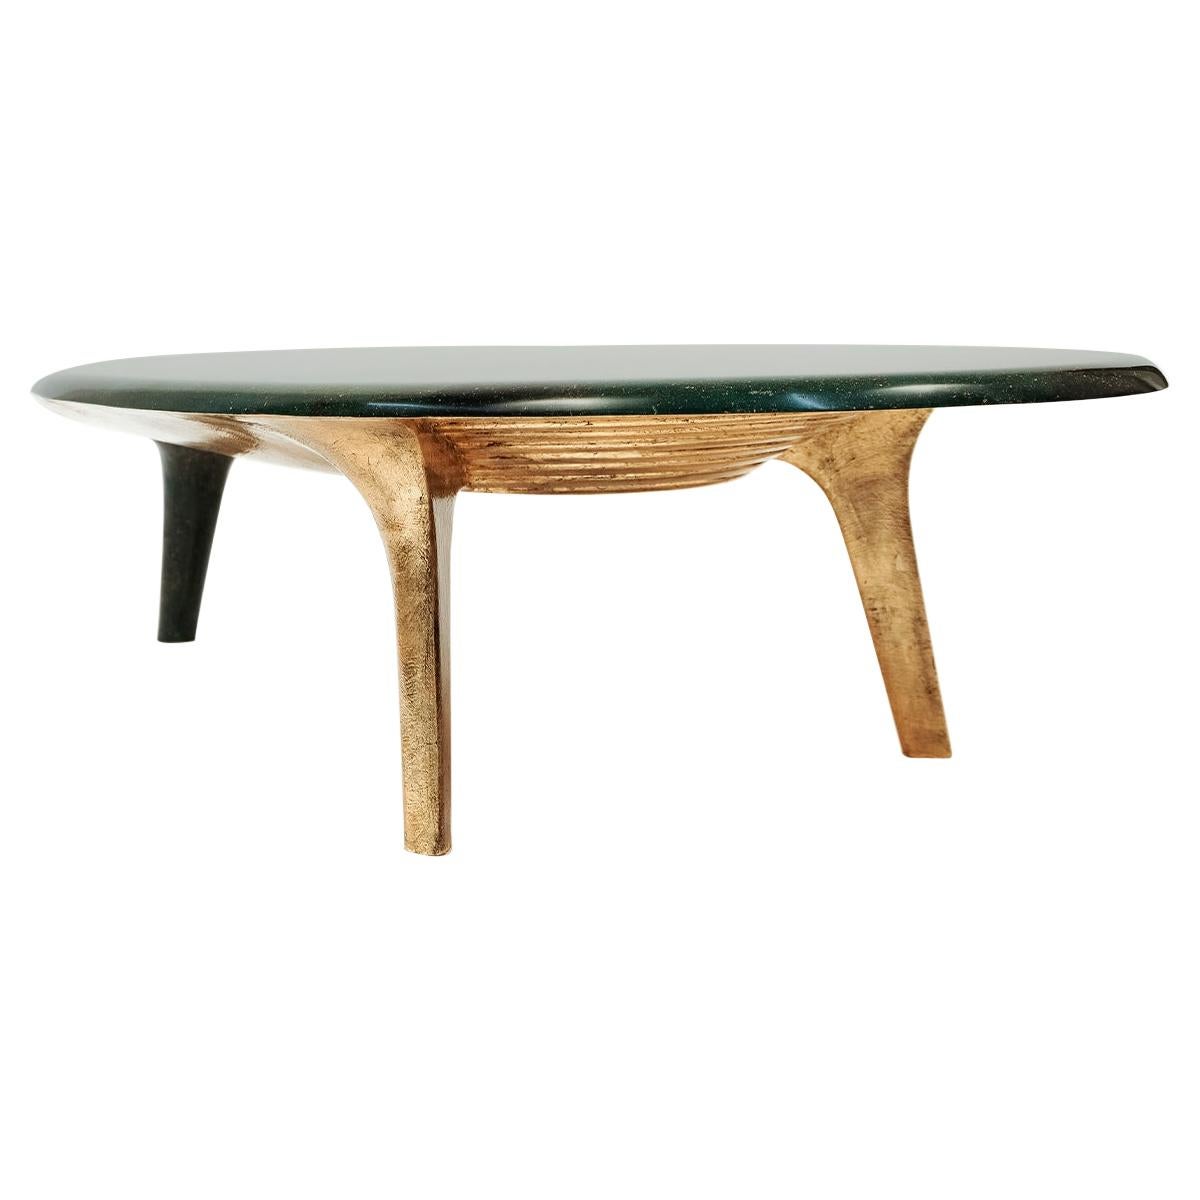 21st Century Collectible Design, A Noste Bronze Leaf and Sawdust Resin Low Table